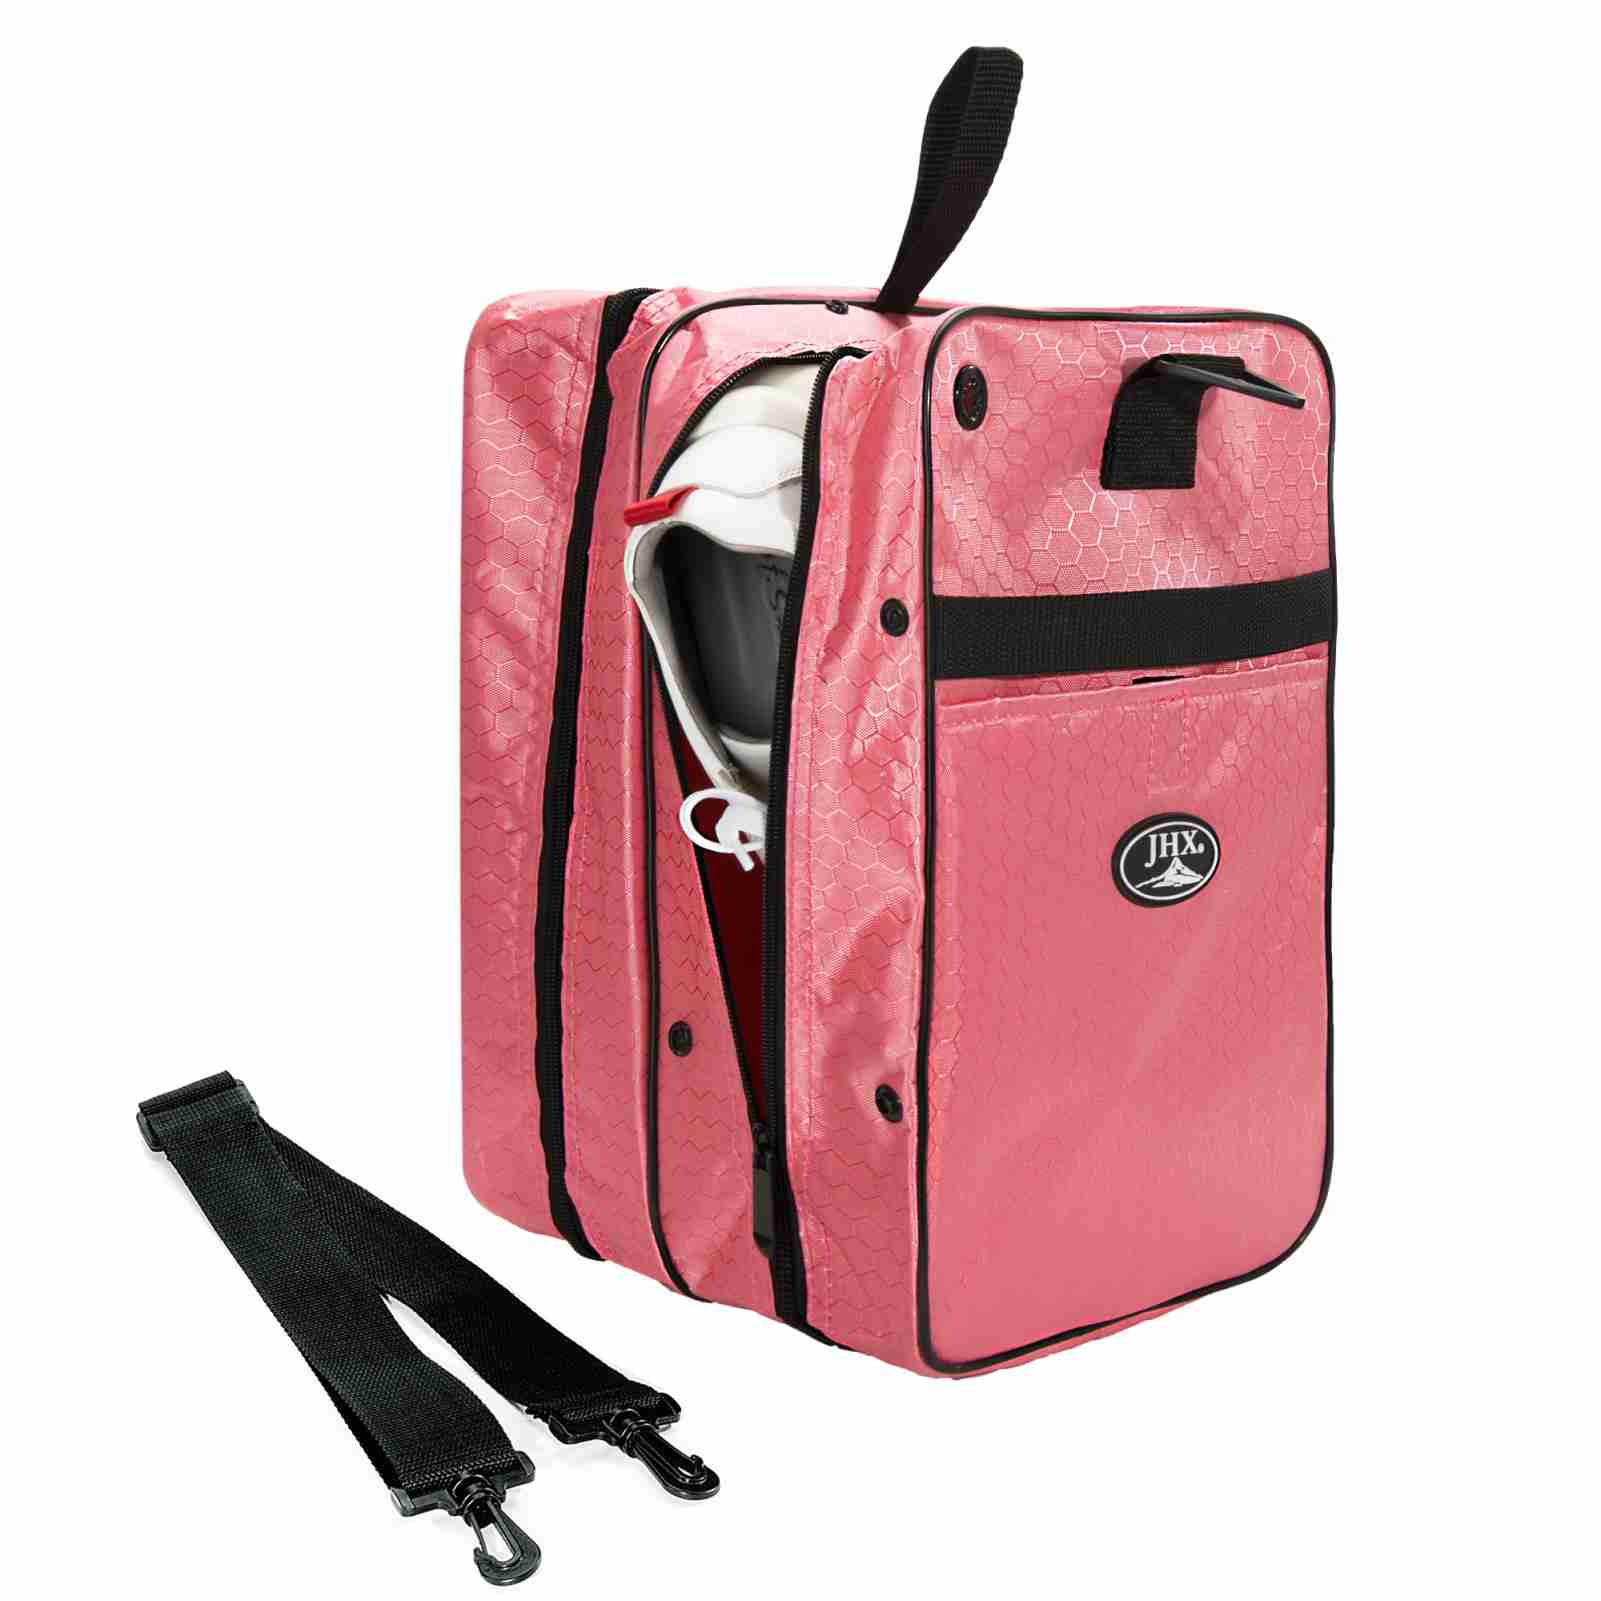 Premium Shoe Bags for Men & Women JHX Shoe Bag Two-way Carabiner and Pouch 2 in 1 Travel Shoe Bag【Upgraded】with Anti-loss Keychain Pink 